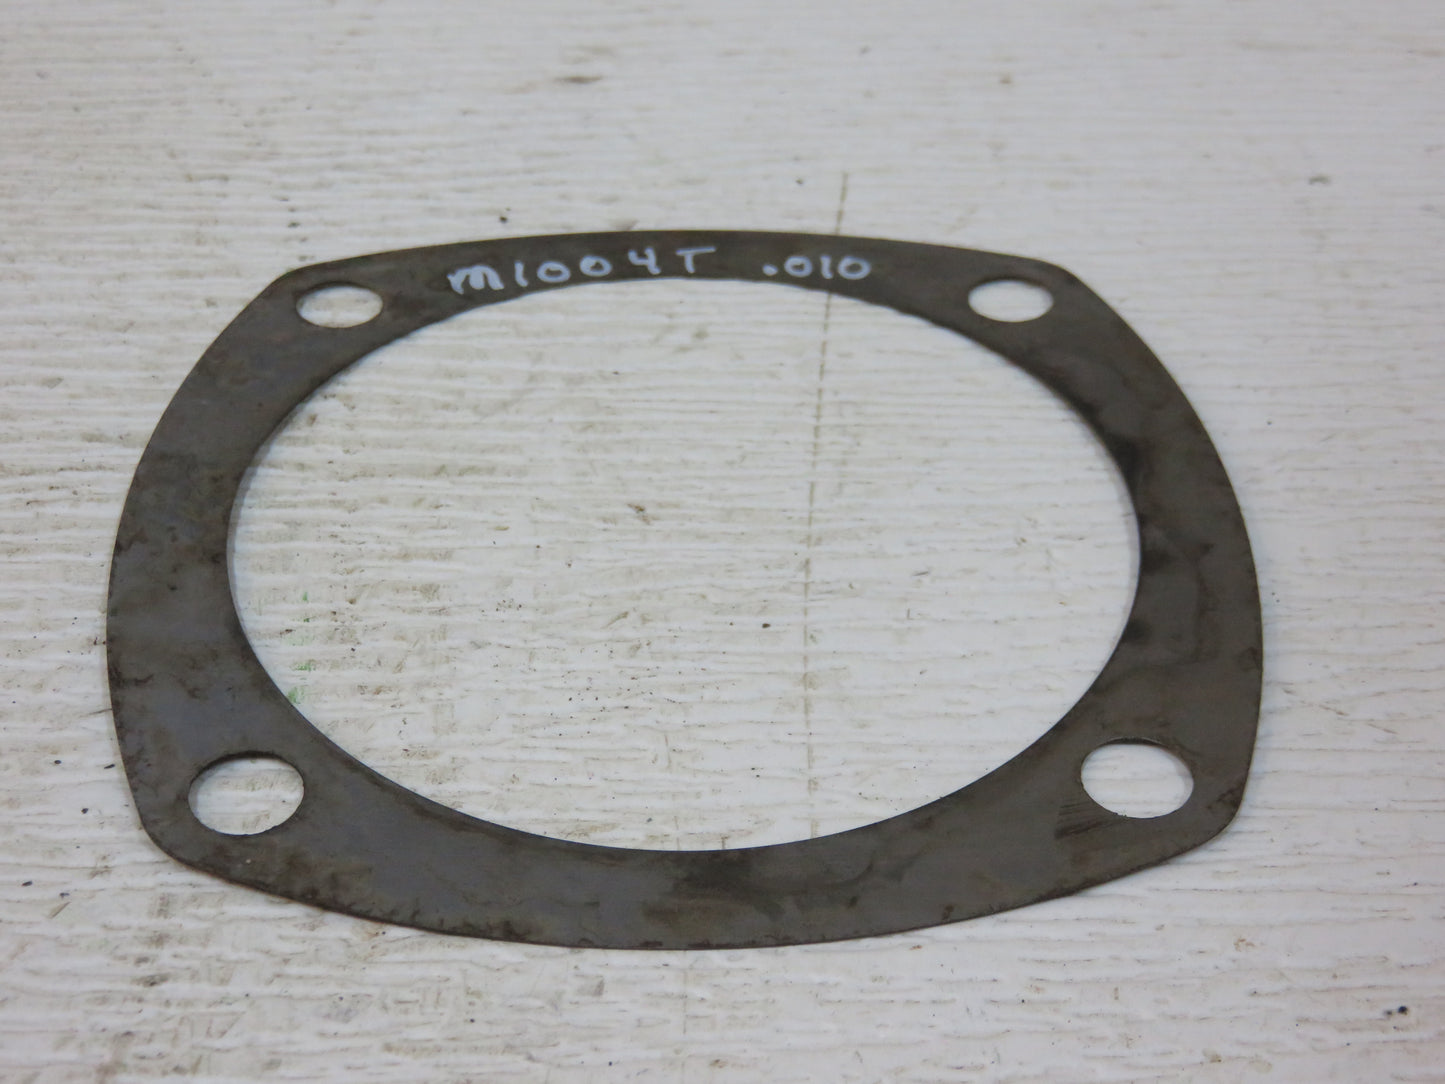 M1004T John Deere Axle Bearing Quill Shim For MT, 40, 420, 430, 435, 1010